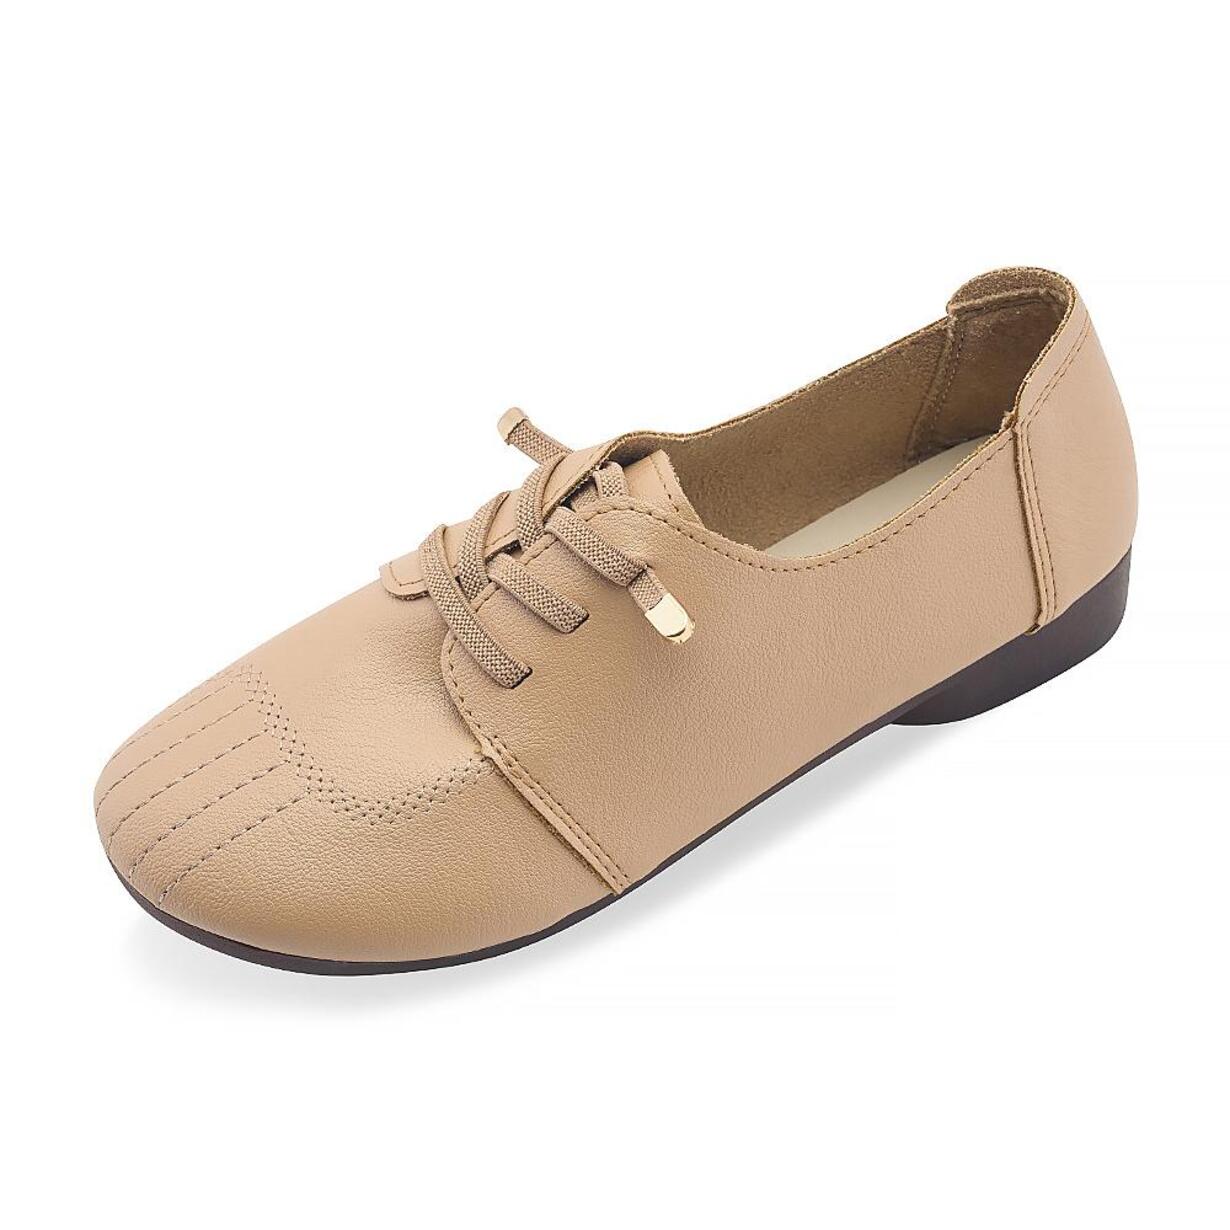 SPUR[스퍼]Helen oxford shoes -SA9025BE